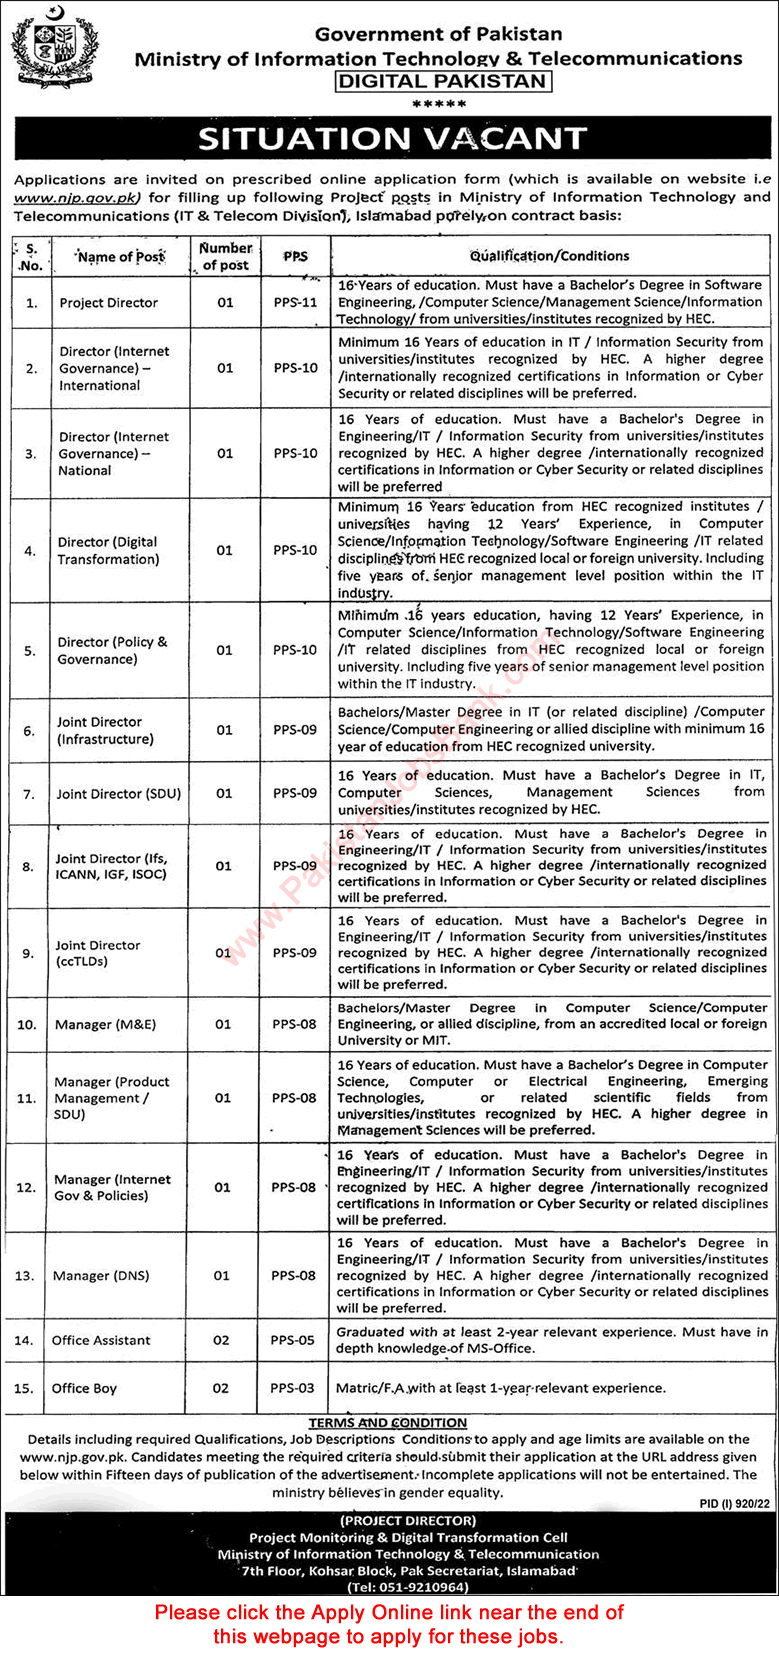 Ministry of Information Technology and Telecommunication Islamabad Jobs August 2022 Apply Online MoITT Latest